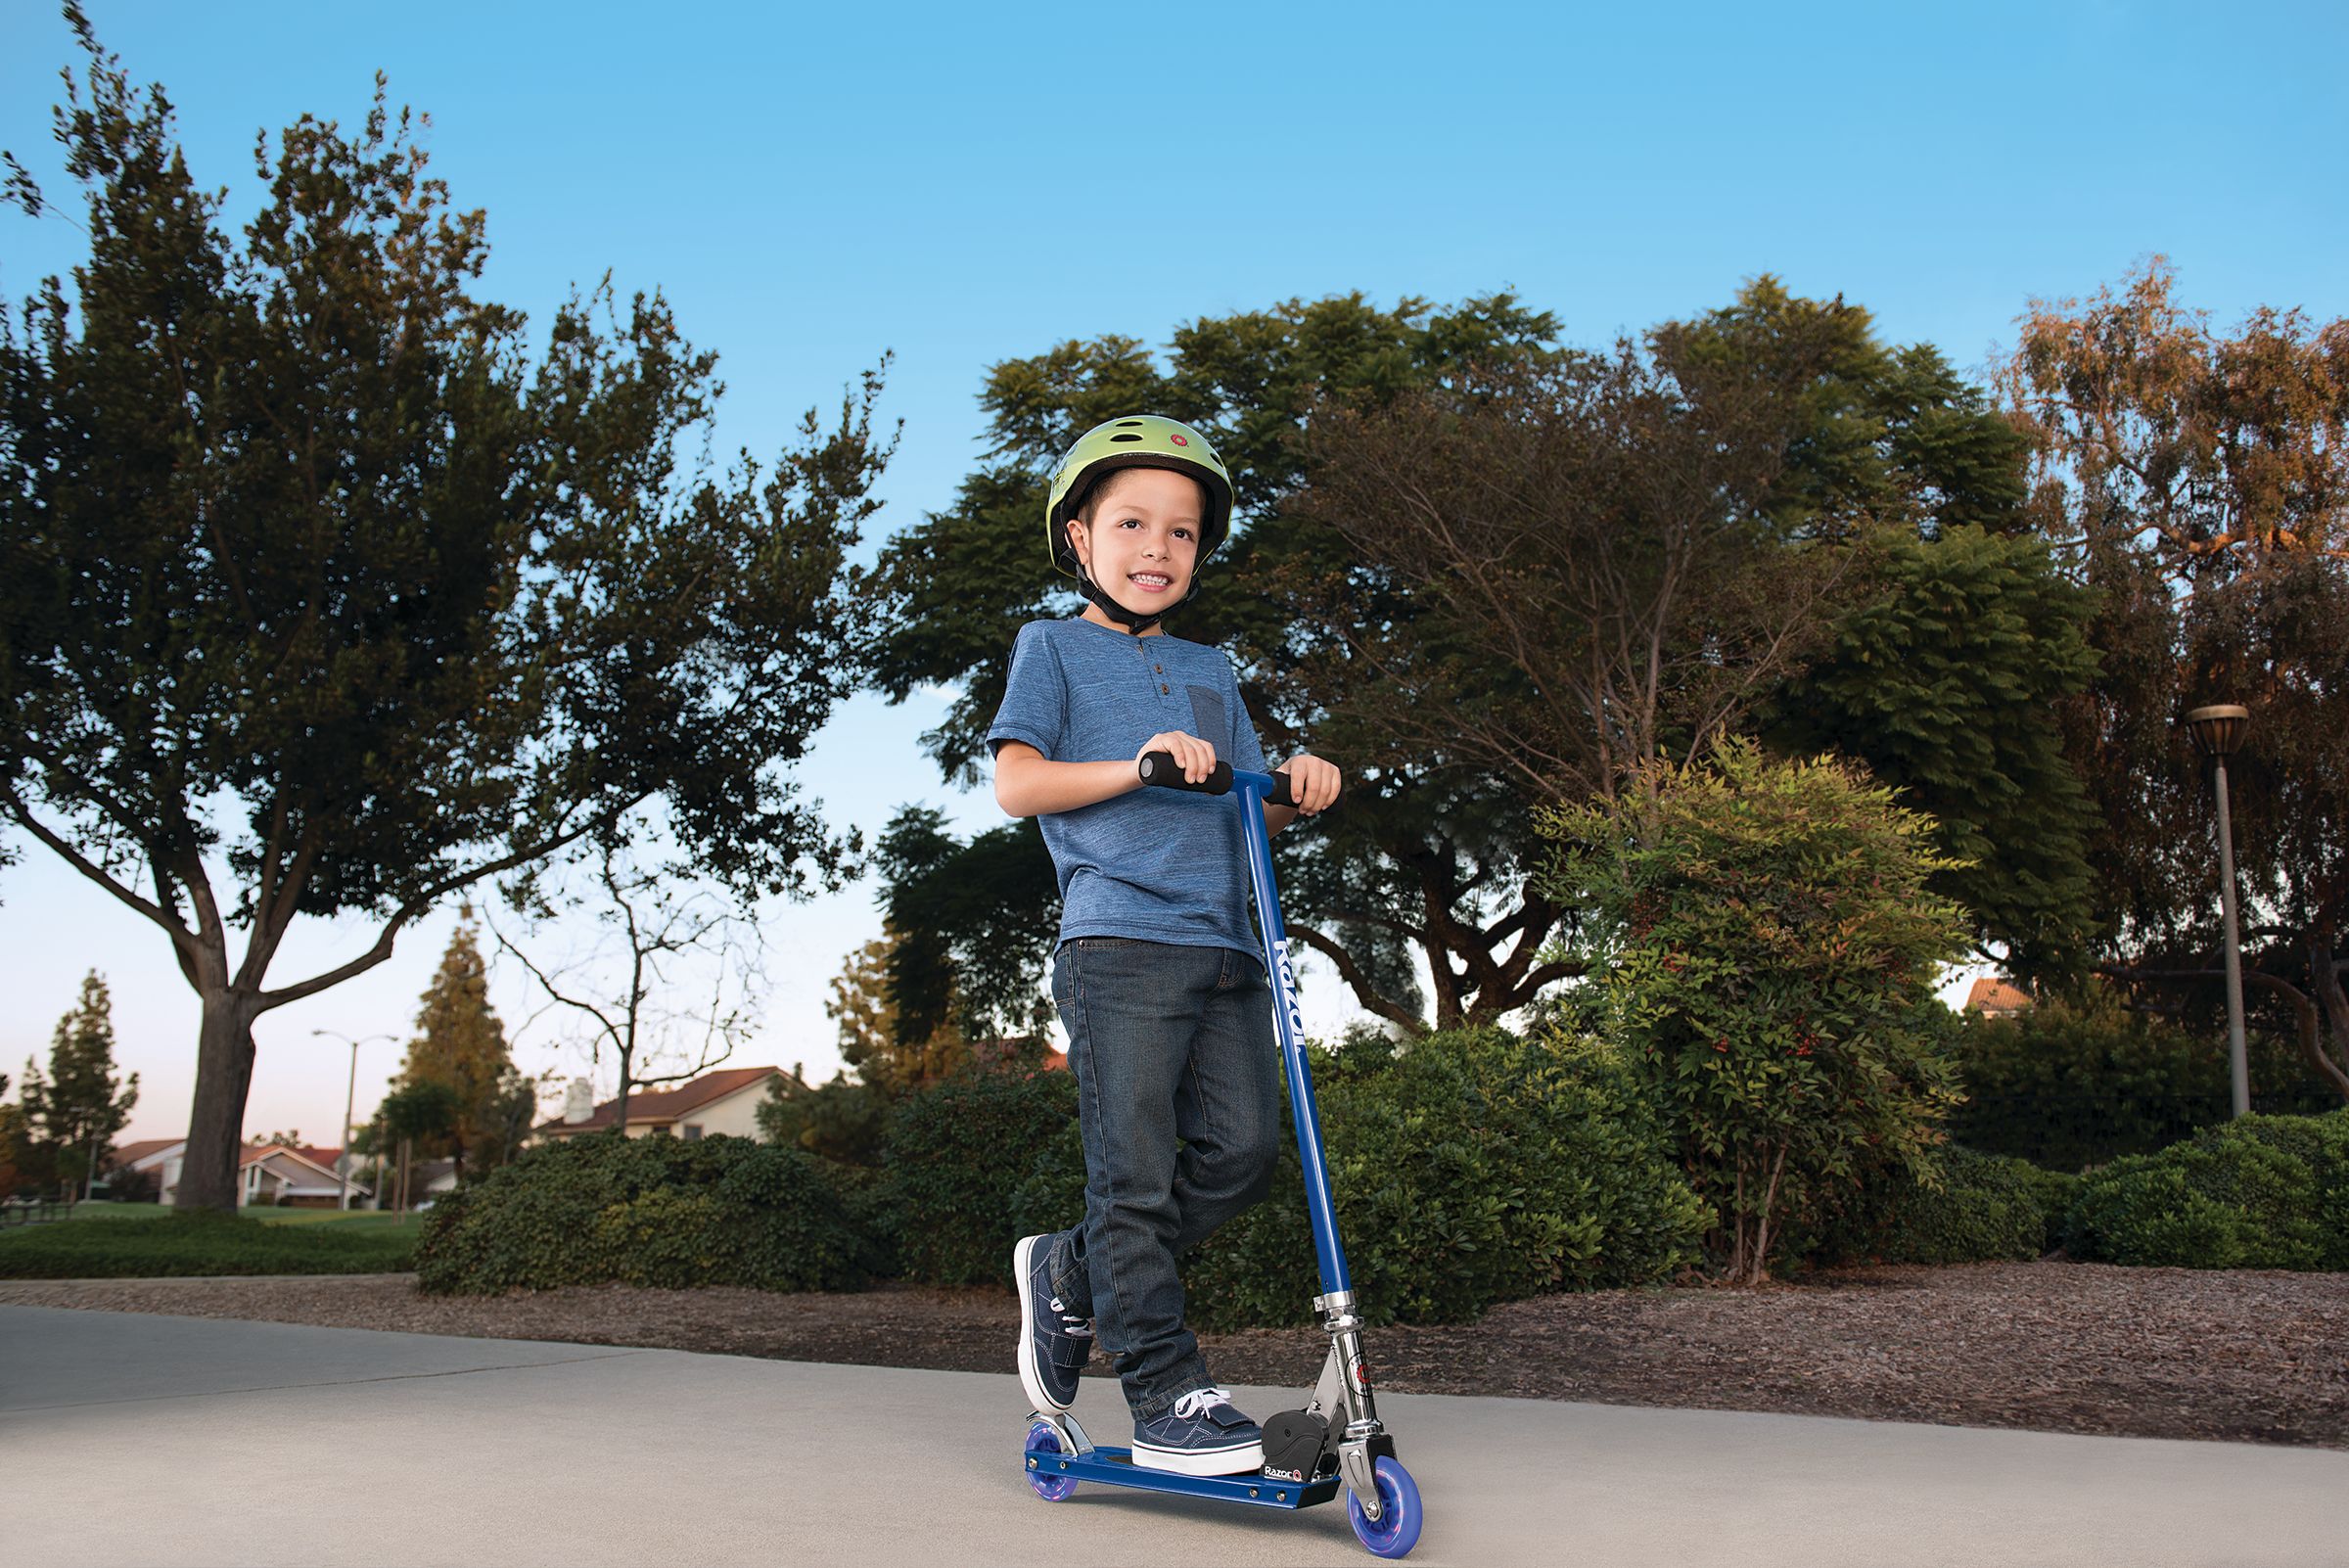 Razor S Folding Kick Scooter with Light-Up Wheel - Blue, for Kids Ages 5+ and up to 110 lbs - image 4 of 10